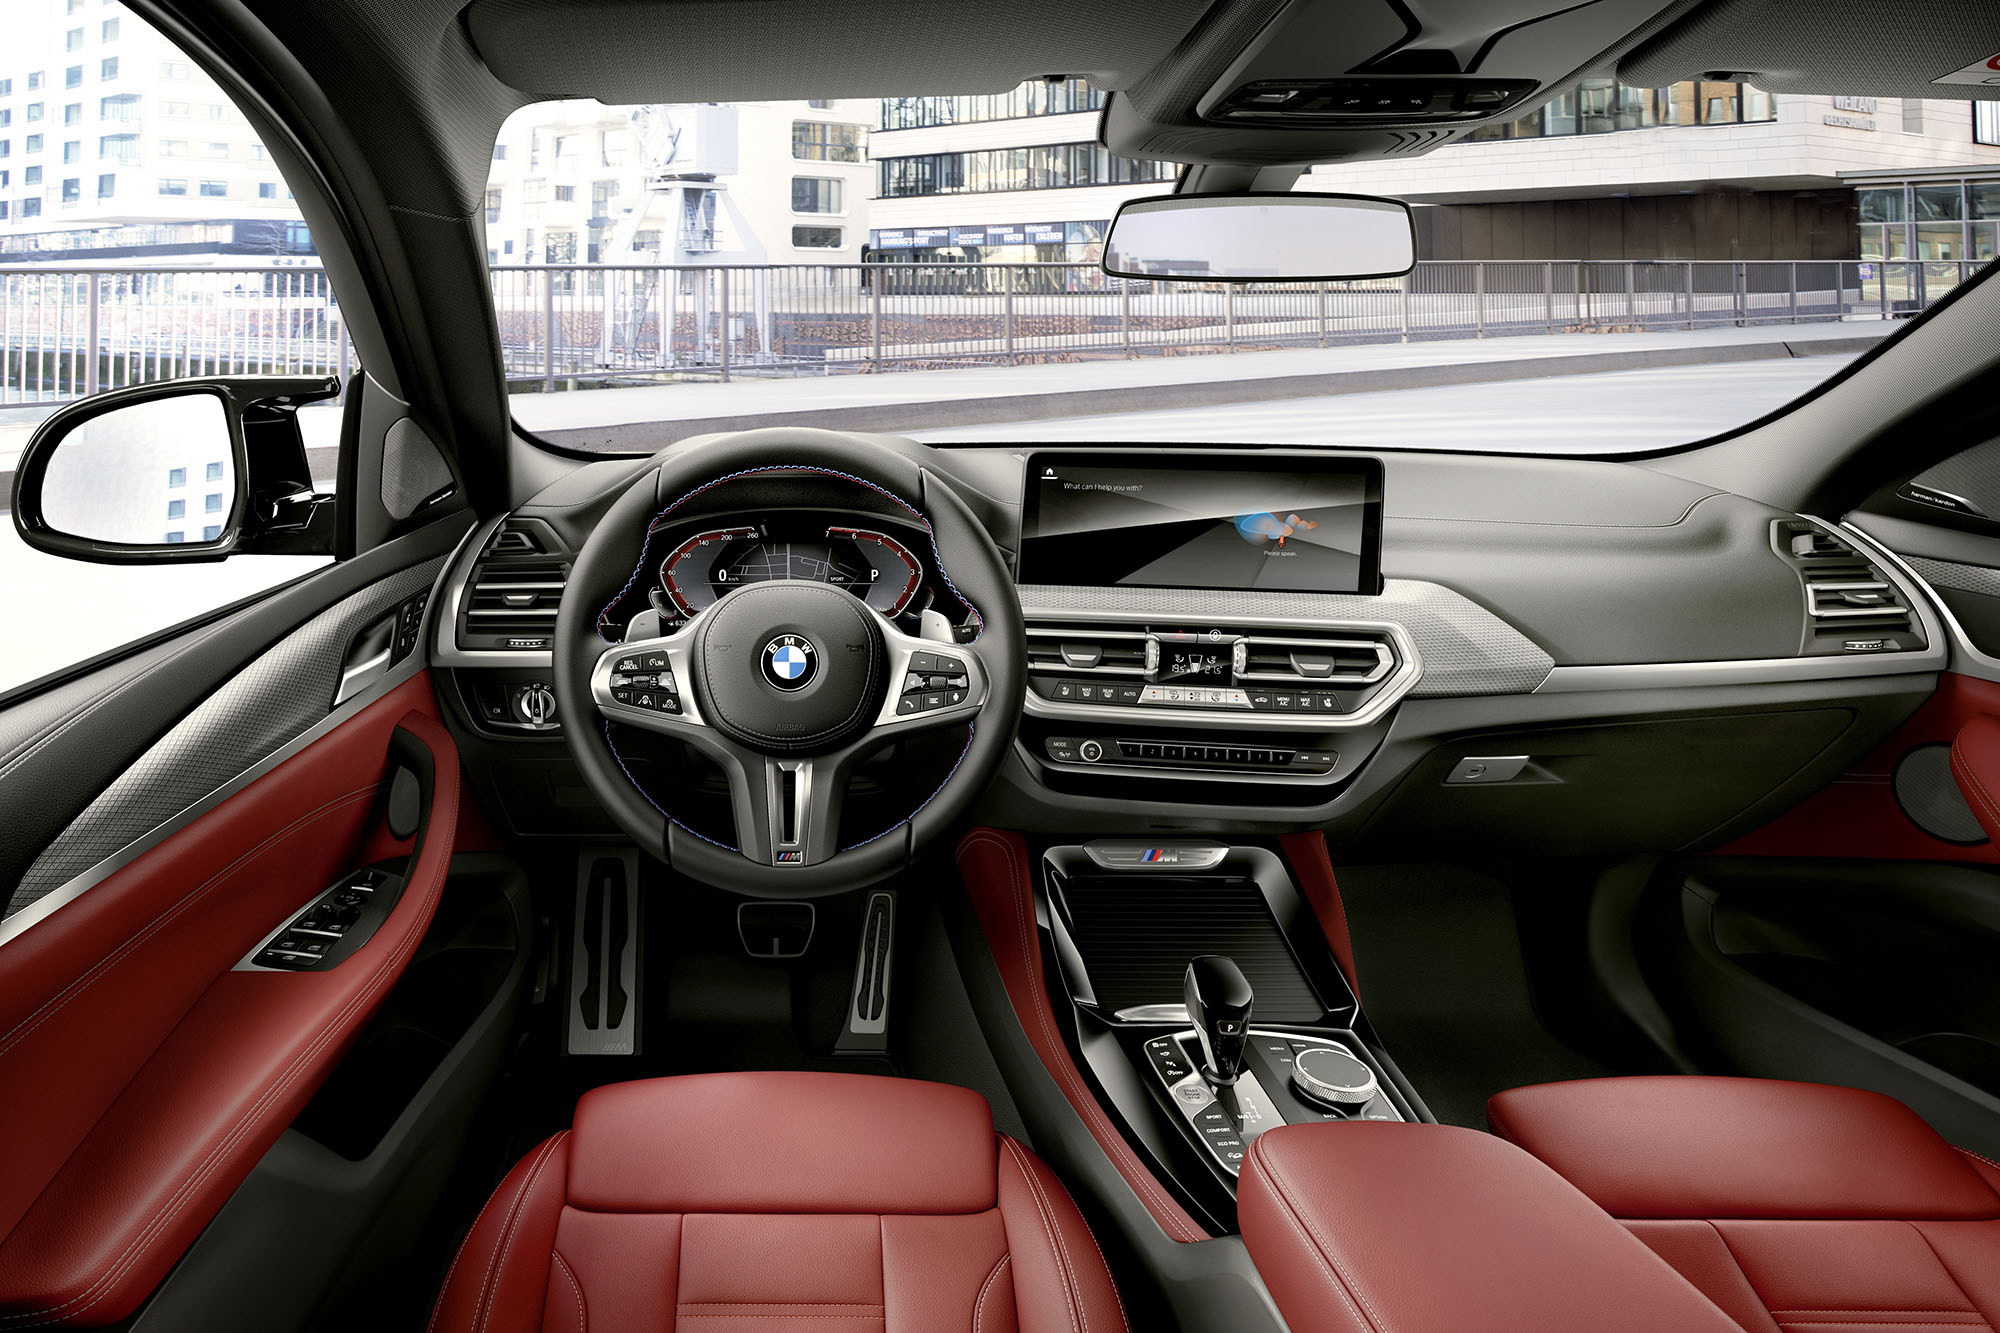 BMW X4 interior in red